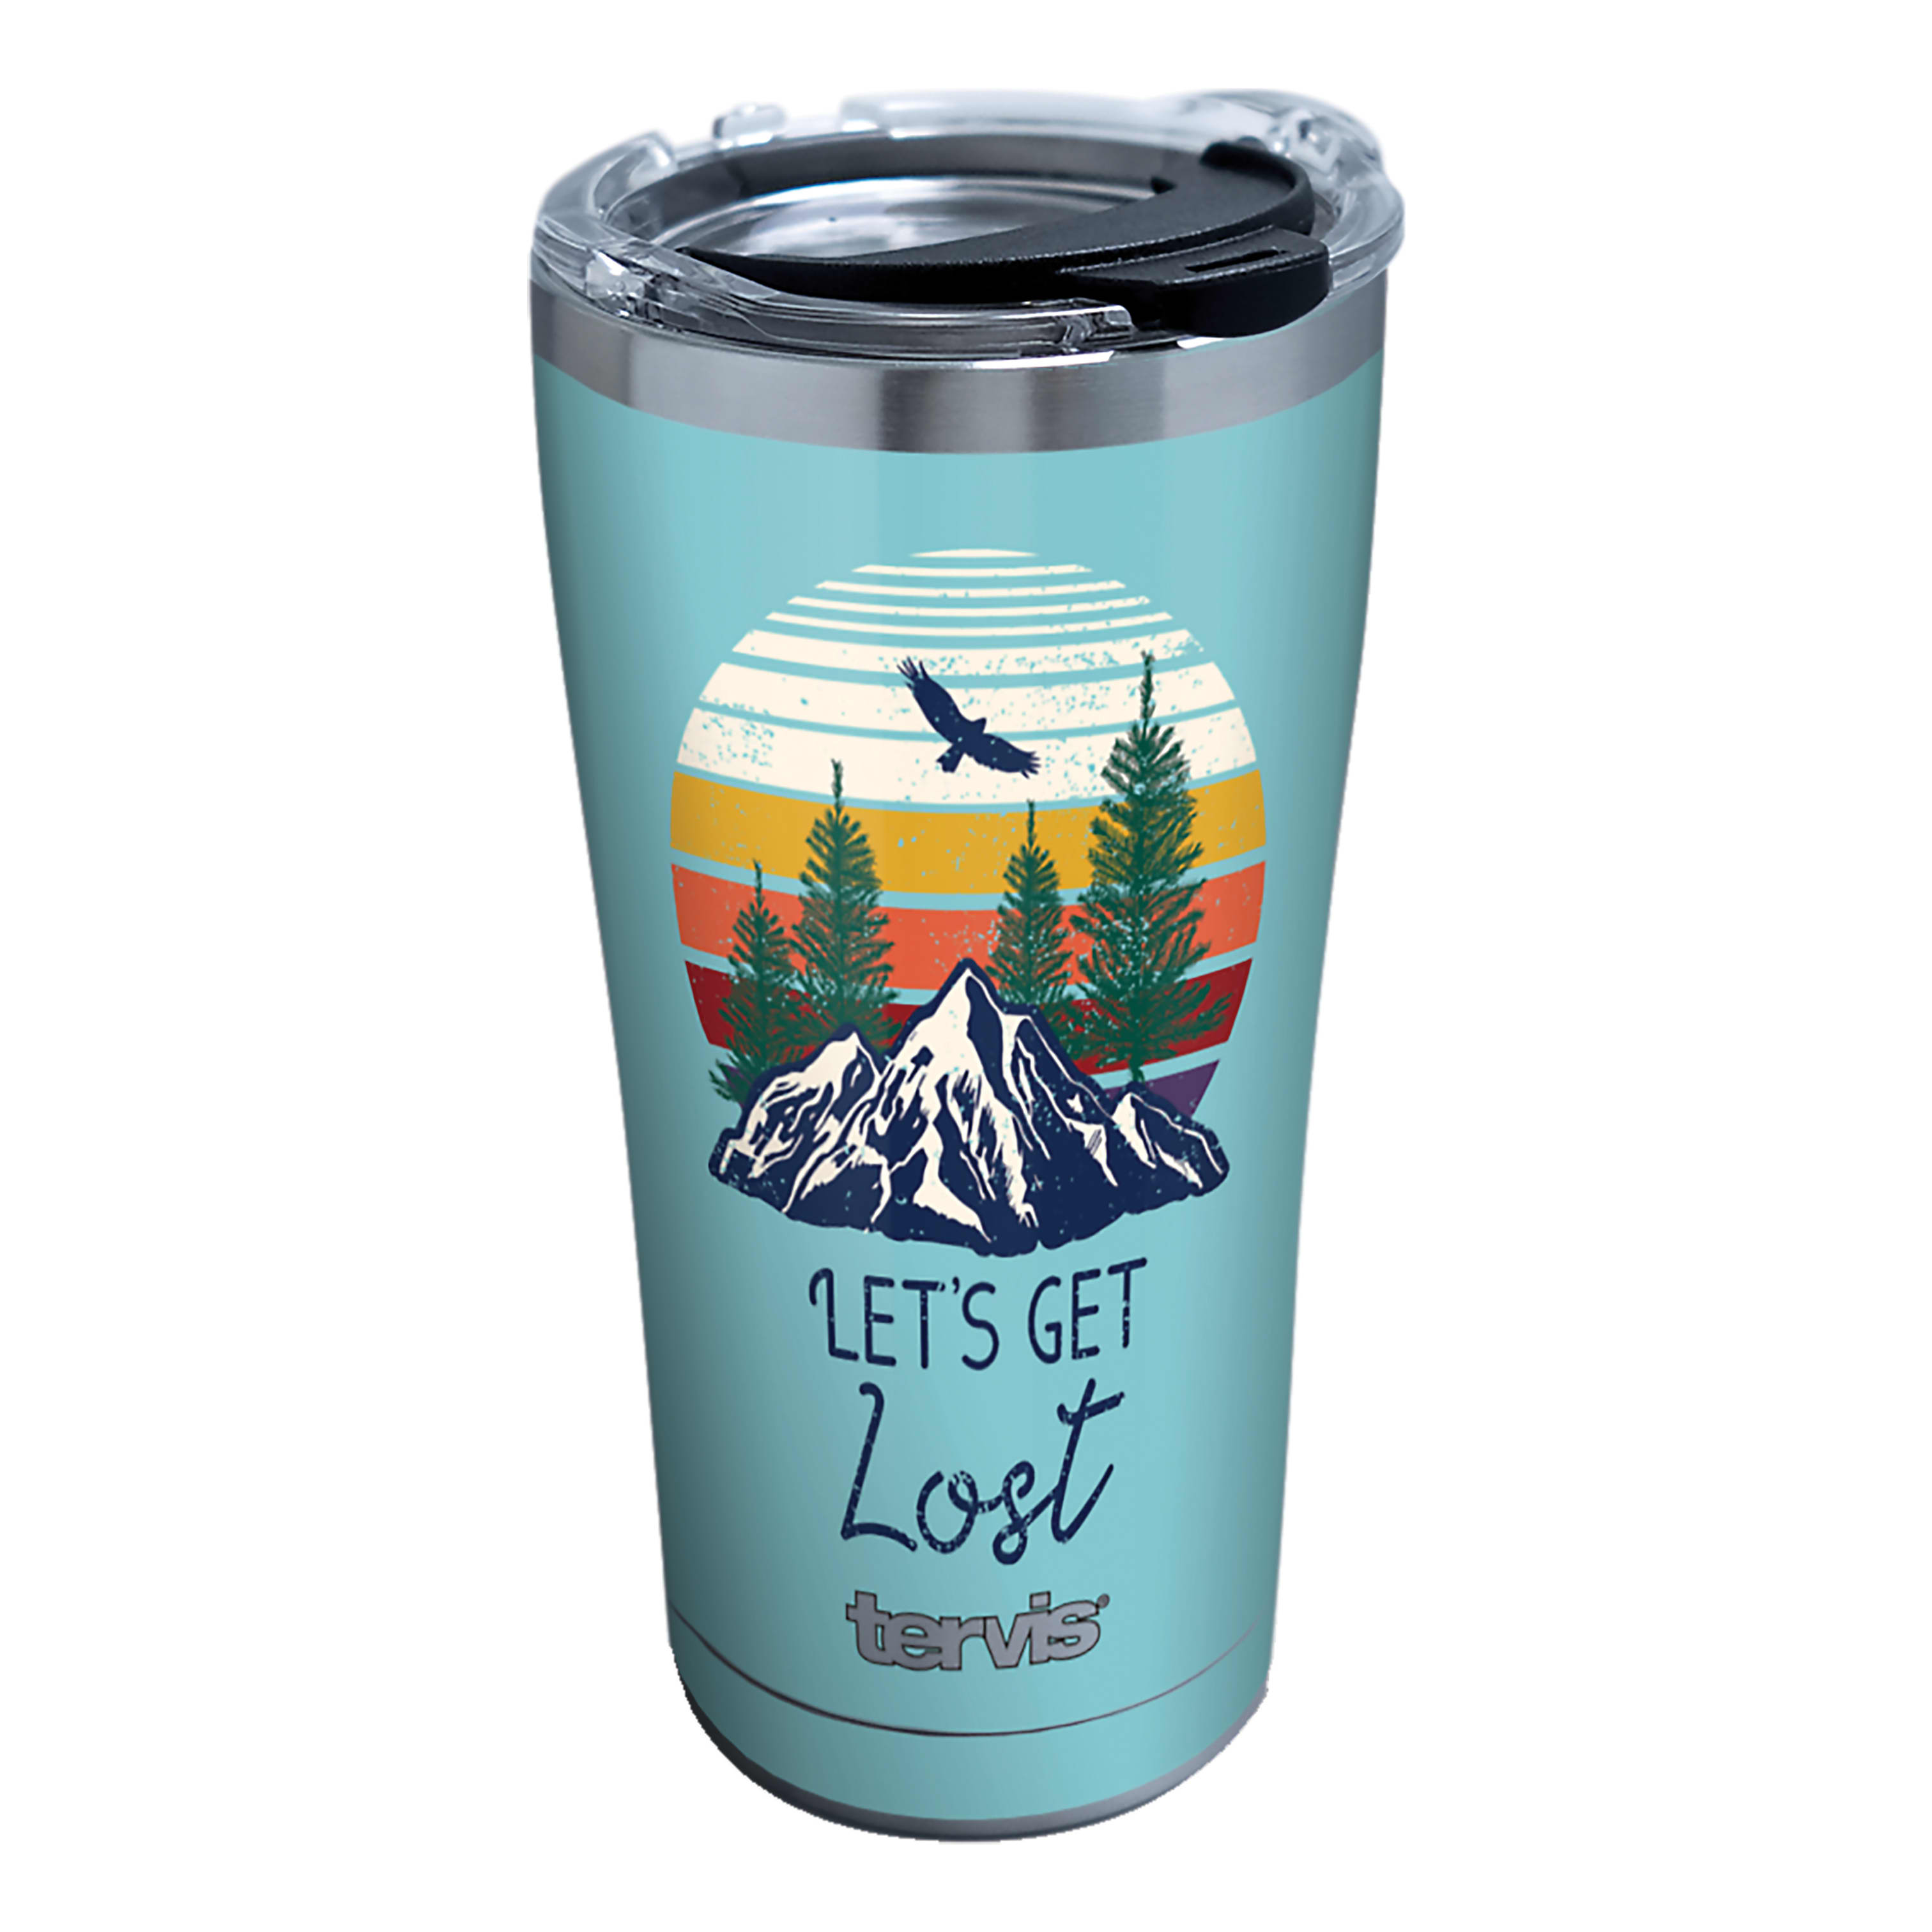 Tervis 20 oz. Stainless Steel Tumblers - Let's Get Lost